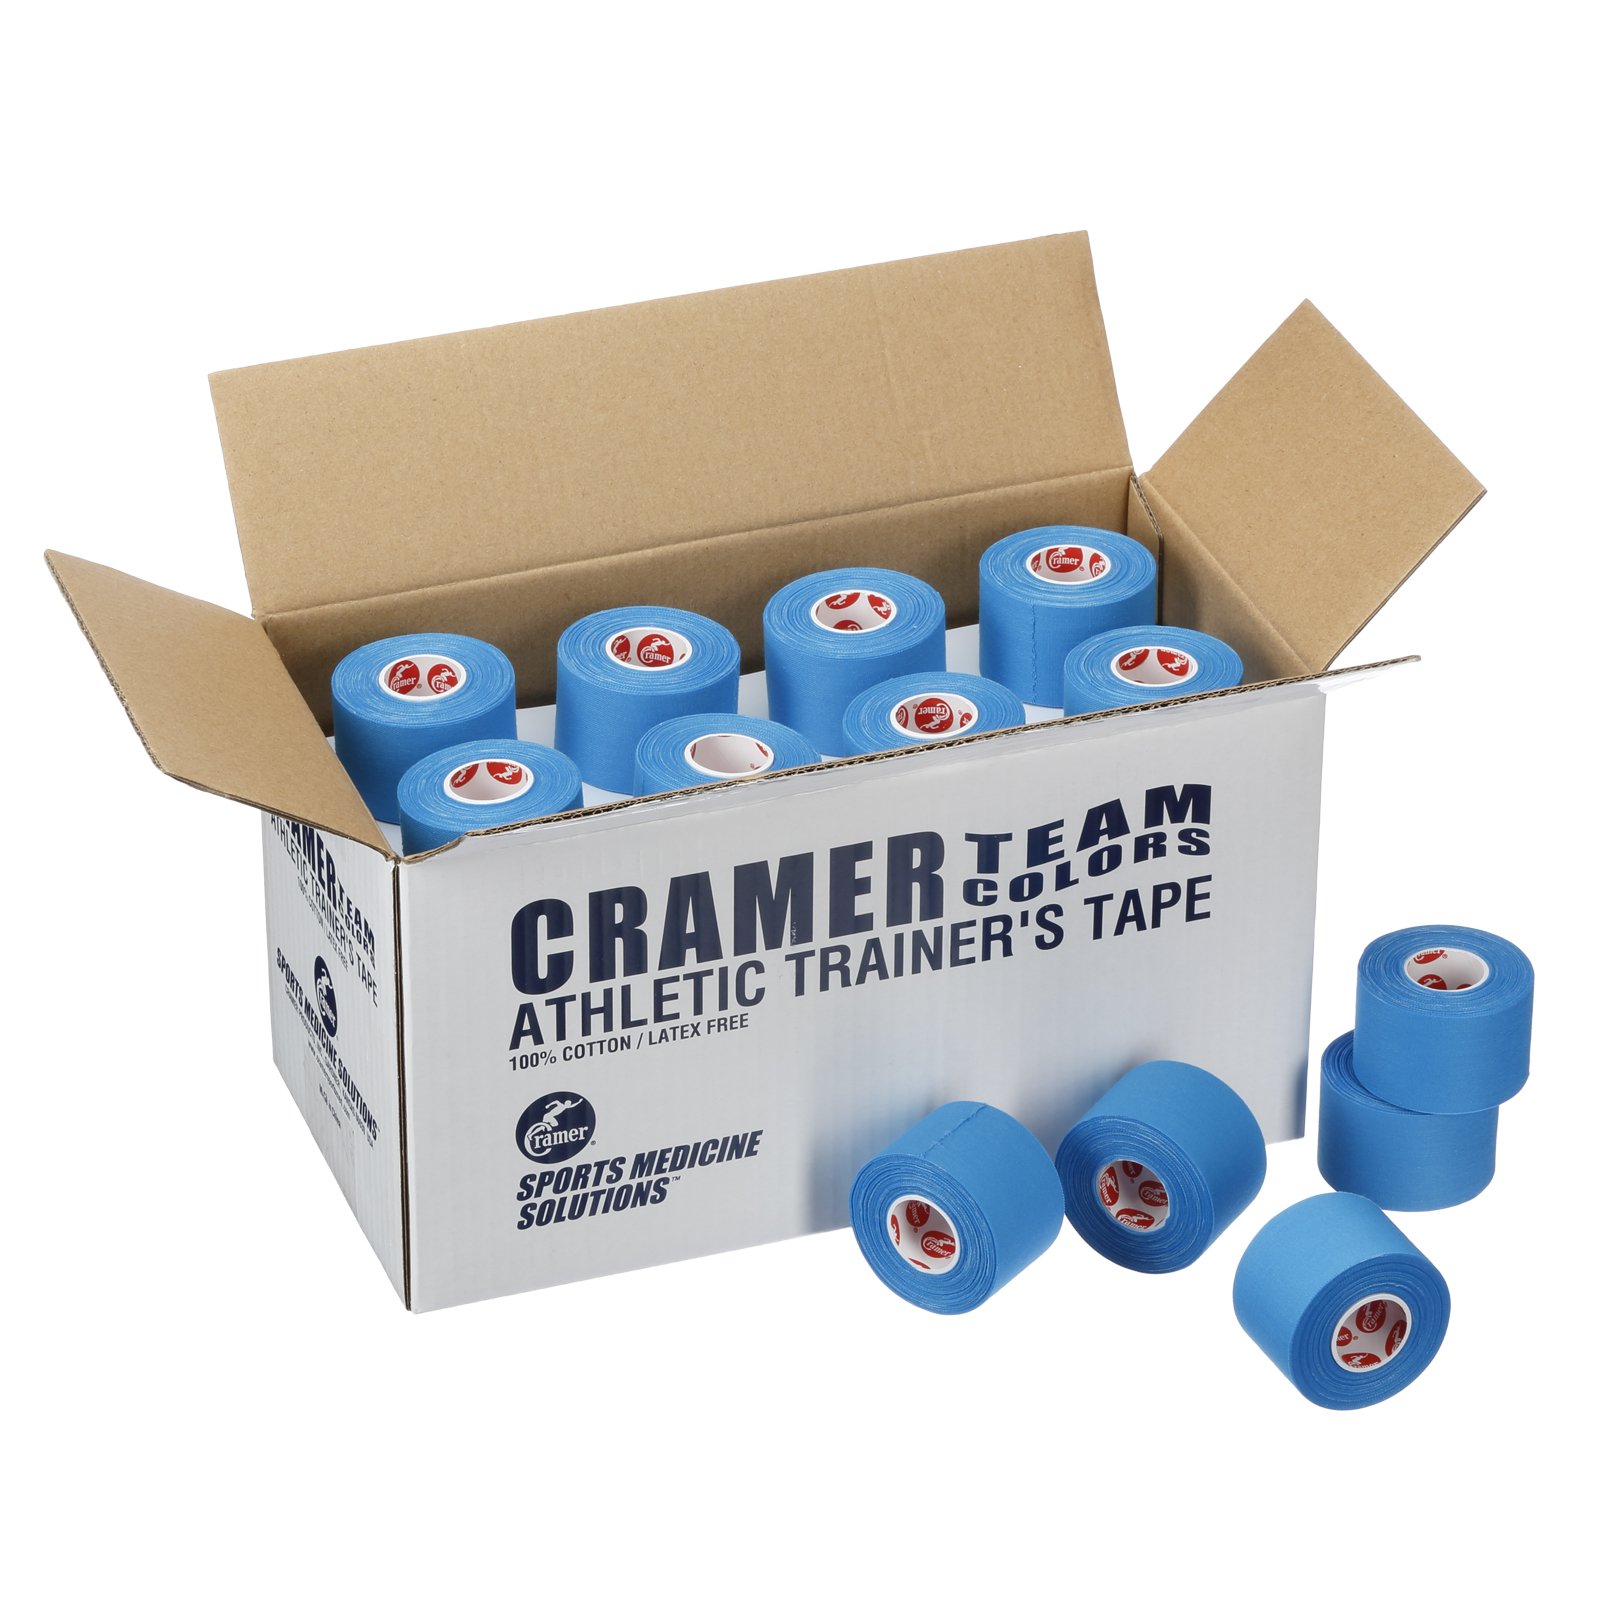 Cramer Team Color Athletic Tape for Ankle, Wrist, and Injury Taping, Helps Protect and Prevent Injuries, Promotes Faster Healing, Athletic Training First Aid Supplies, 1.5 Inch, Bulk 32 Roll Case